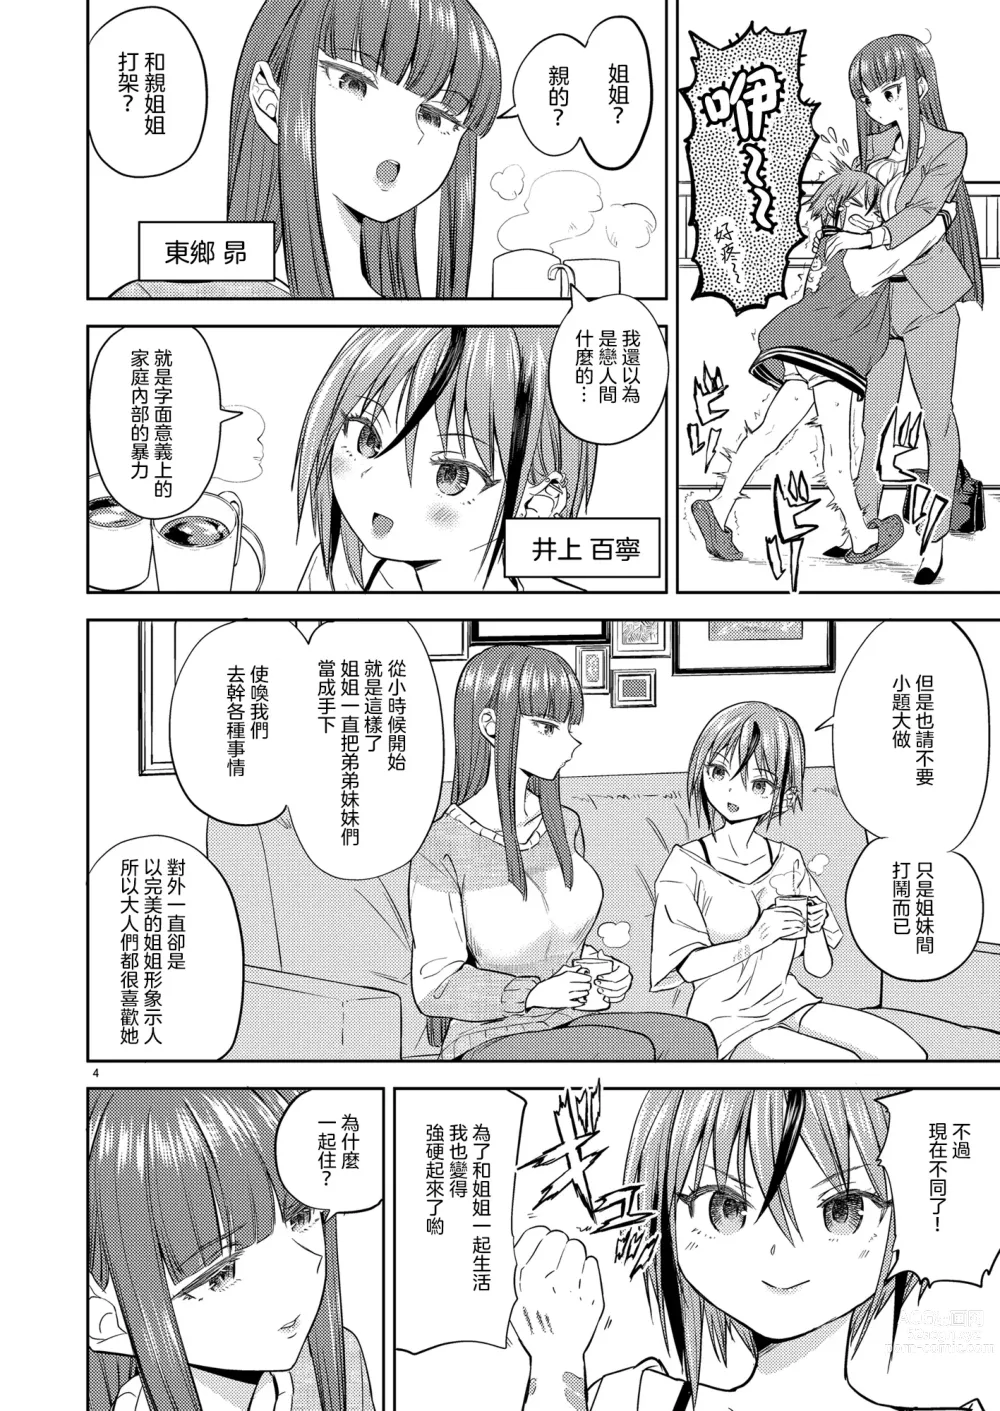 Page 6 of doujinshi 當我們全裸相擁抱之時